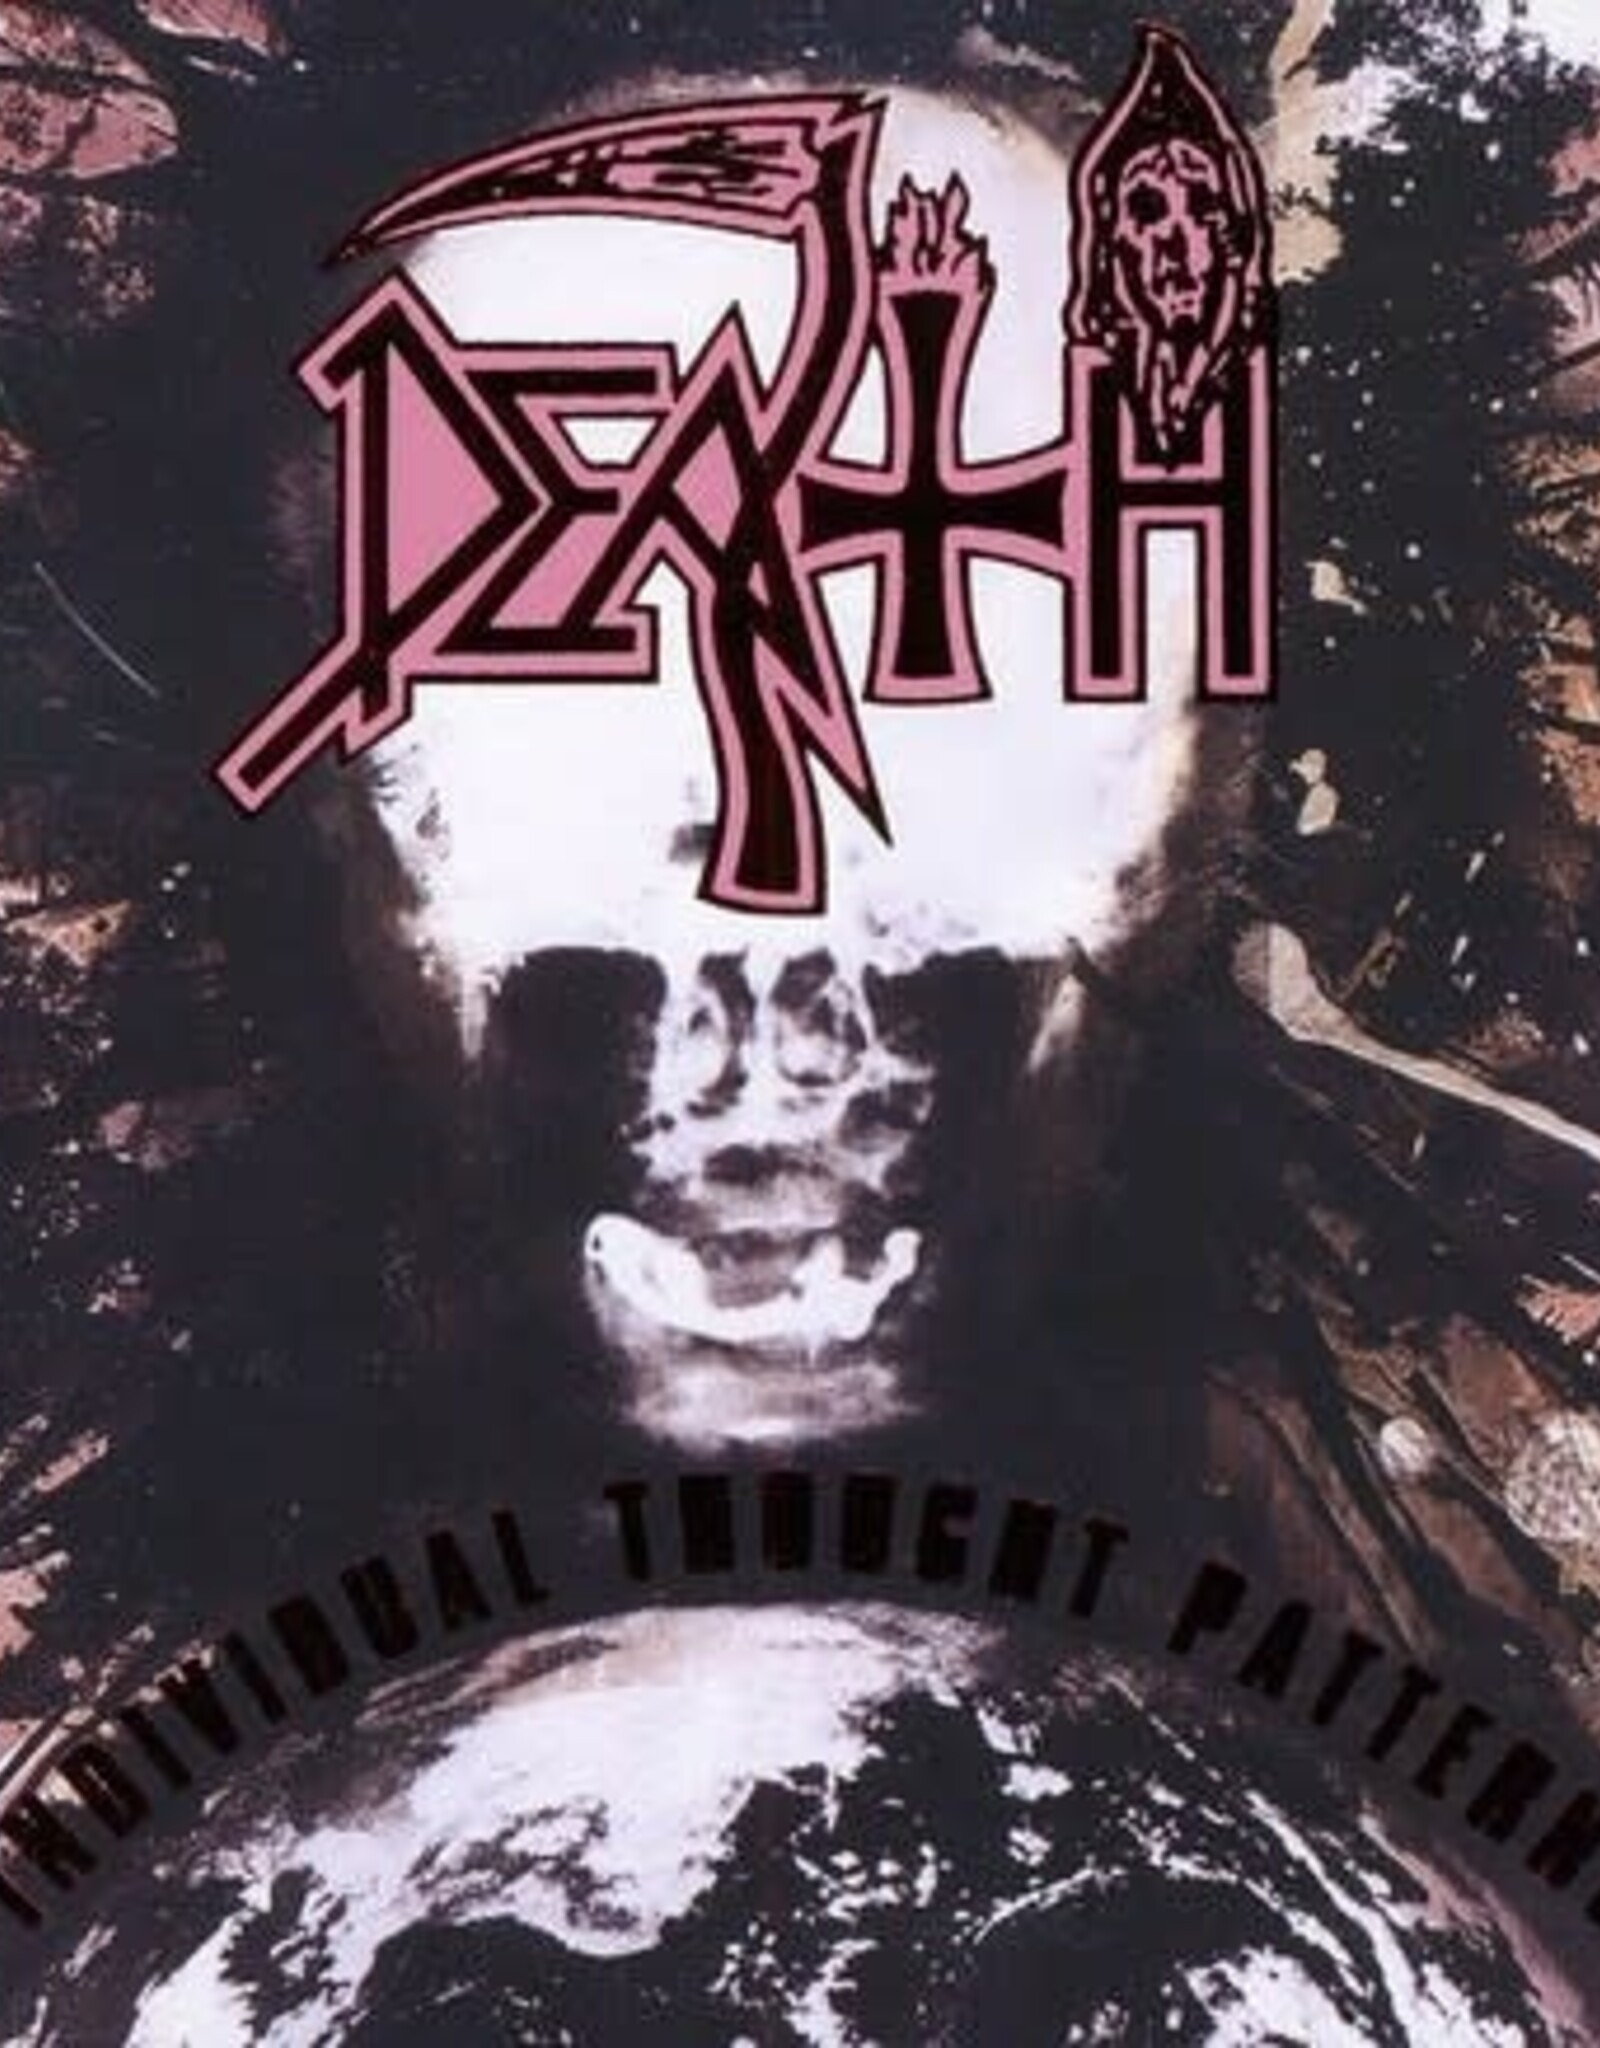 Death - Individual Thought Patterns (Color Vinyl)